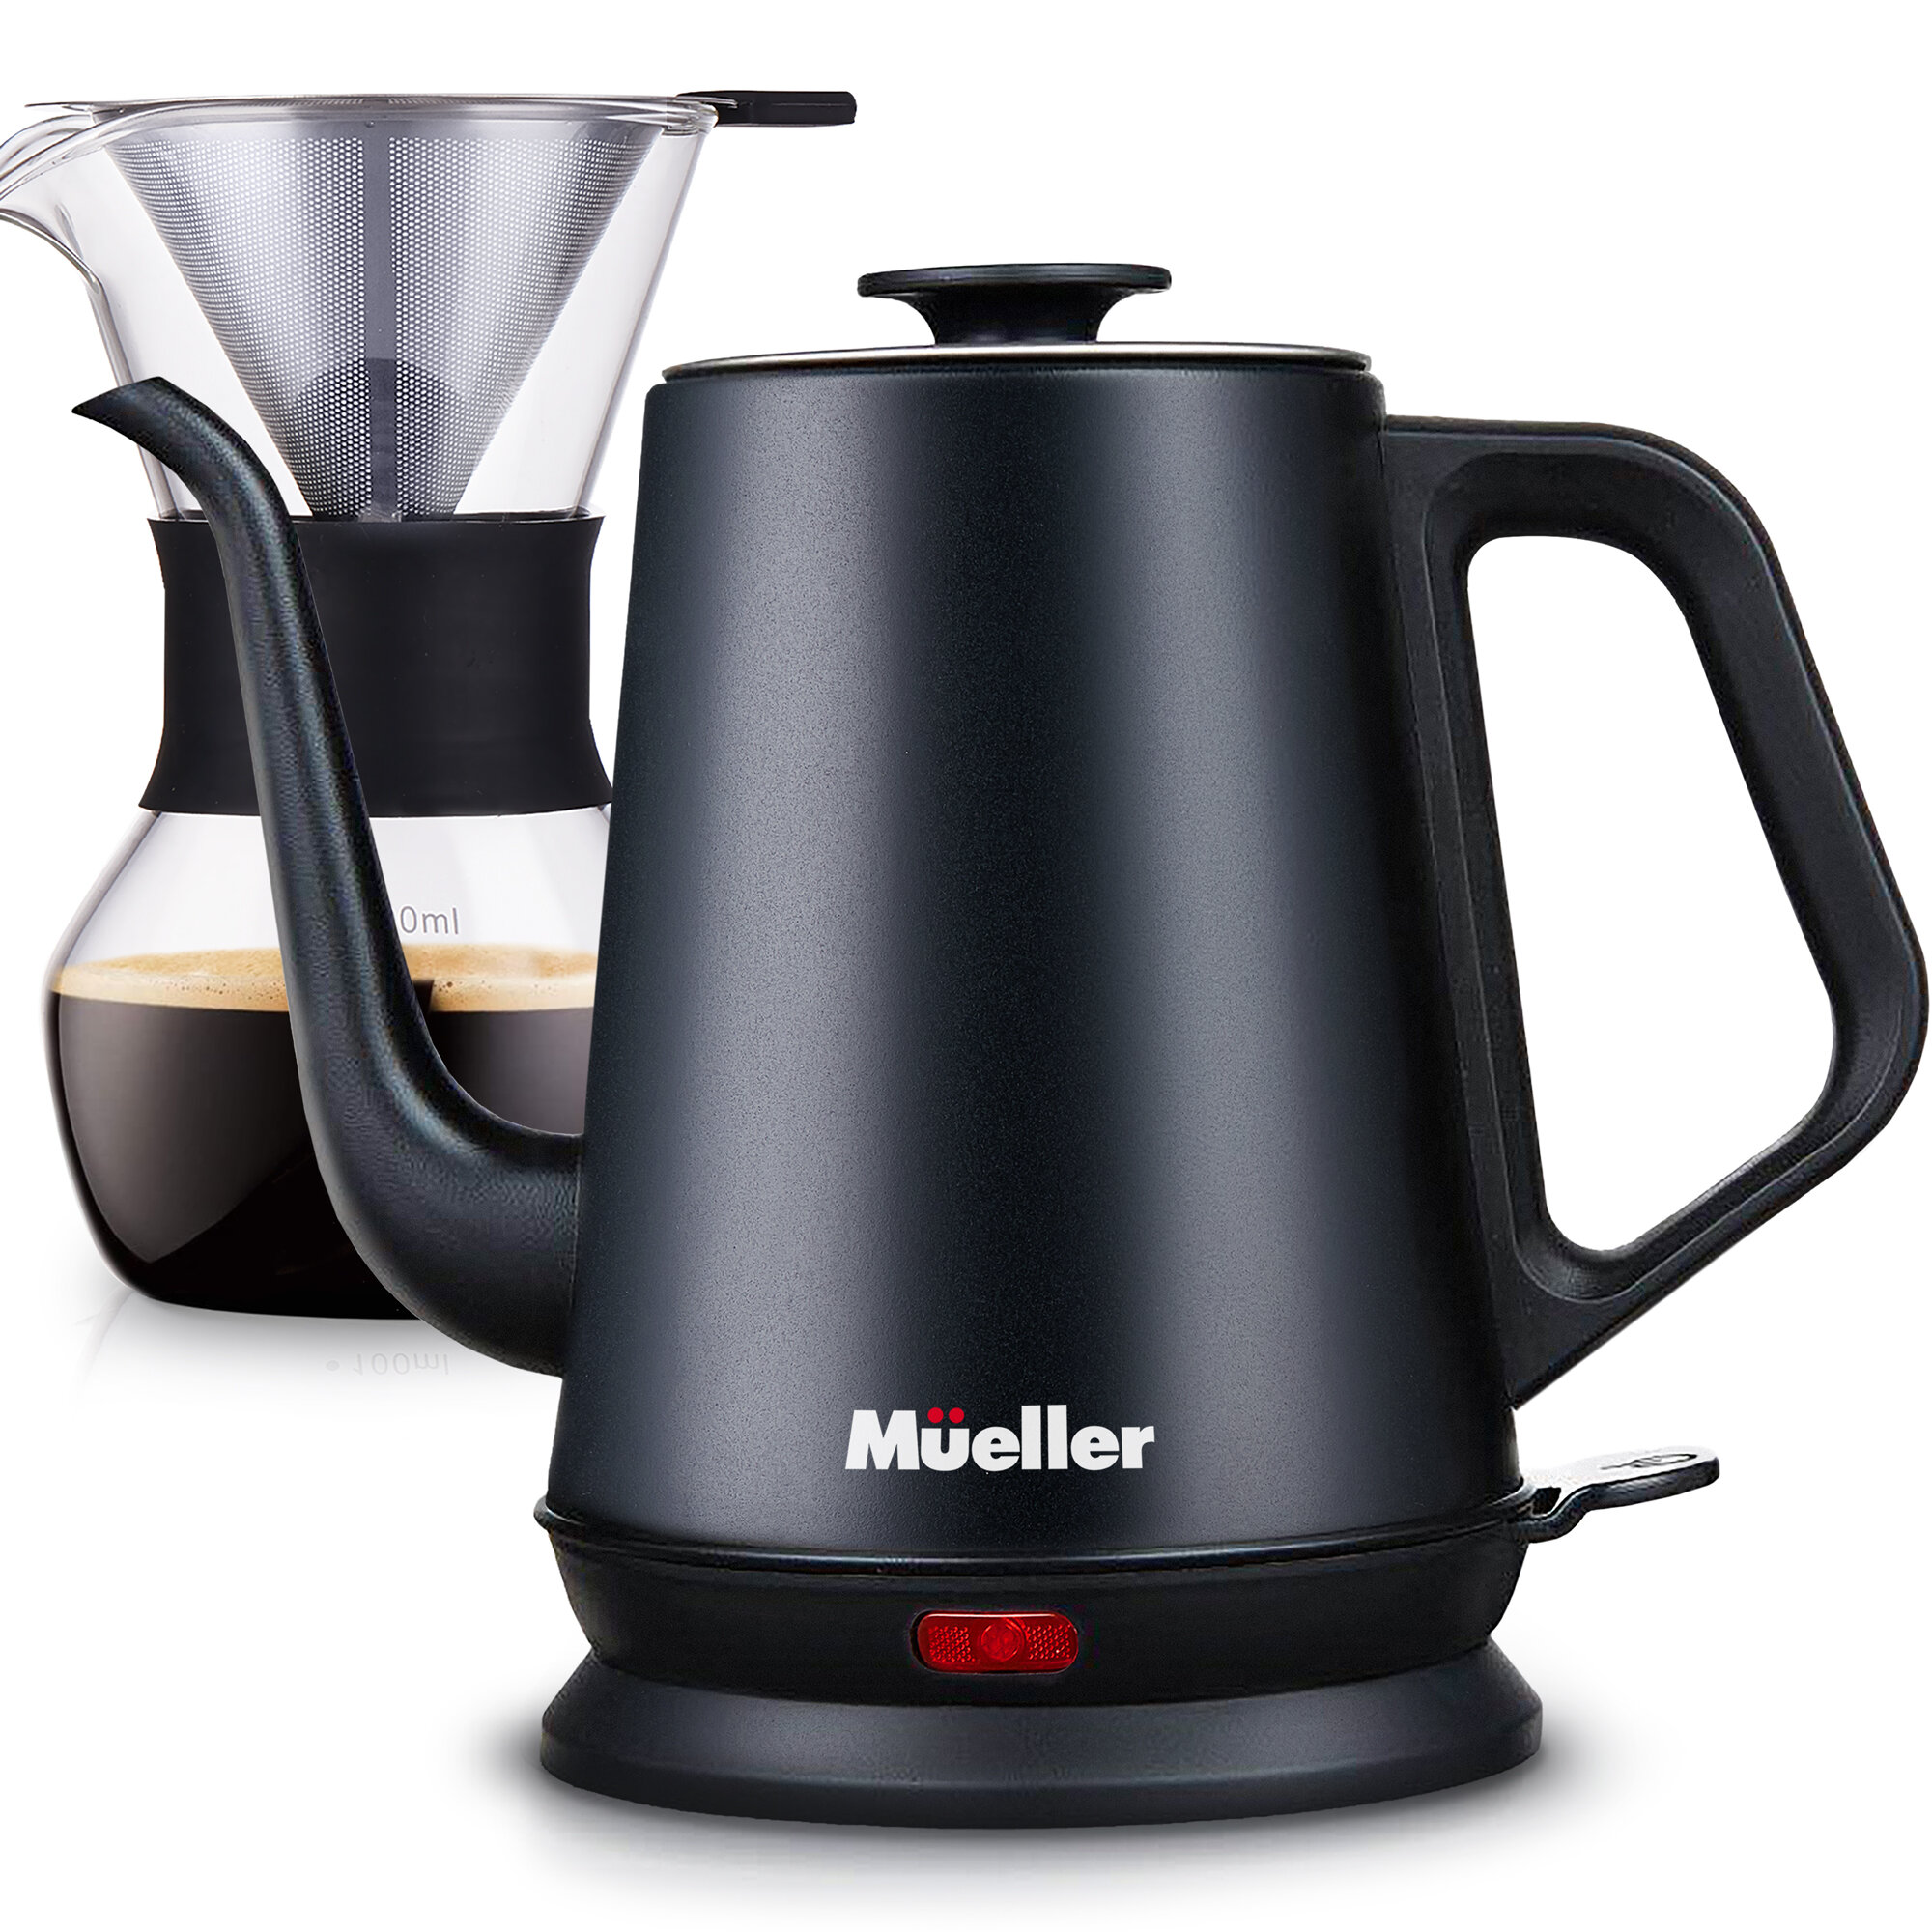  Mueller Electric Kettle, Safe Drinking Tritan Copolyester Heat  Resistant ExacTemp Powerful 1500W, Tea/Coffee Pot-360 Degree Cordless,  Boil-Dry Protection Auto Shut-Off: Home & Kitchen